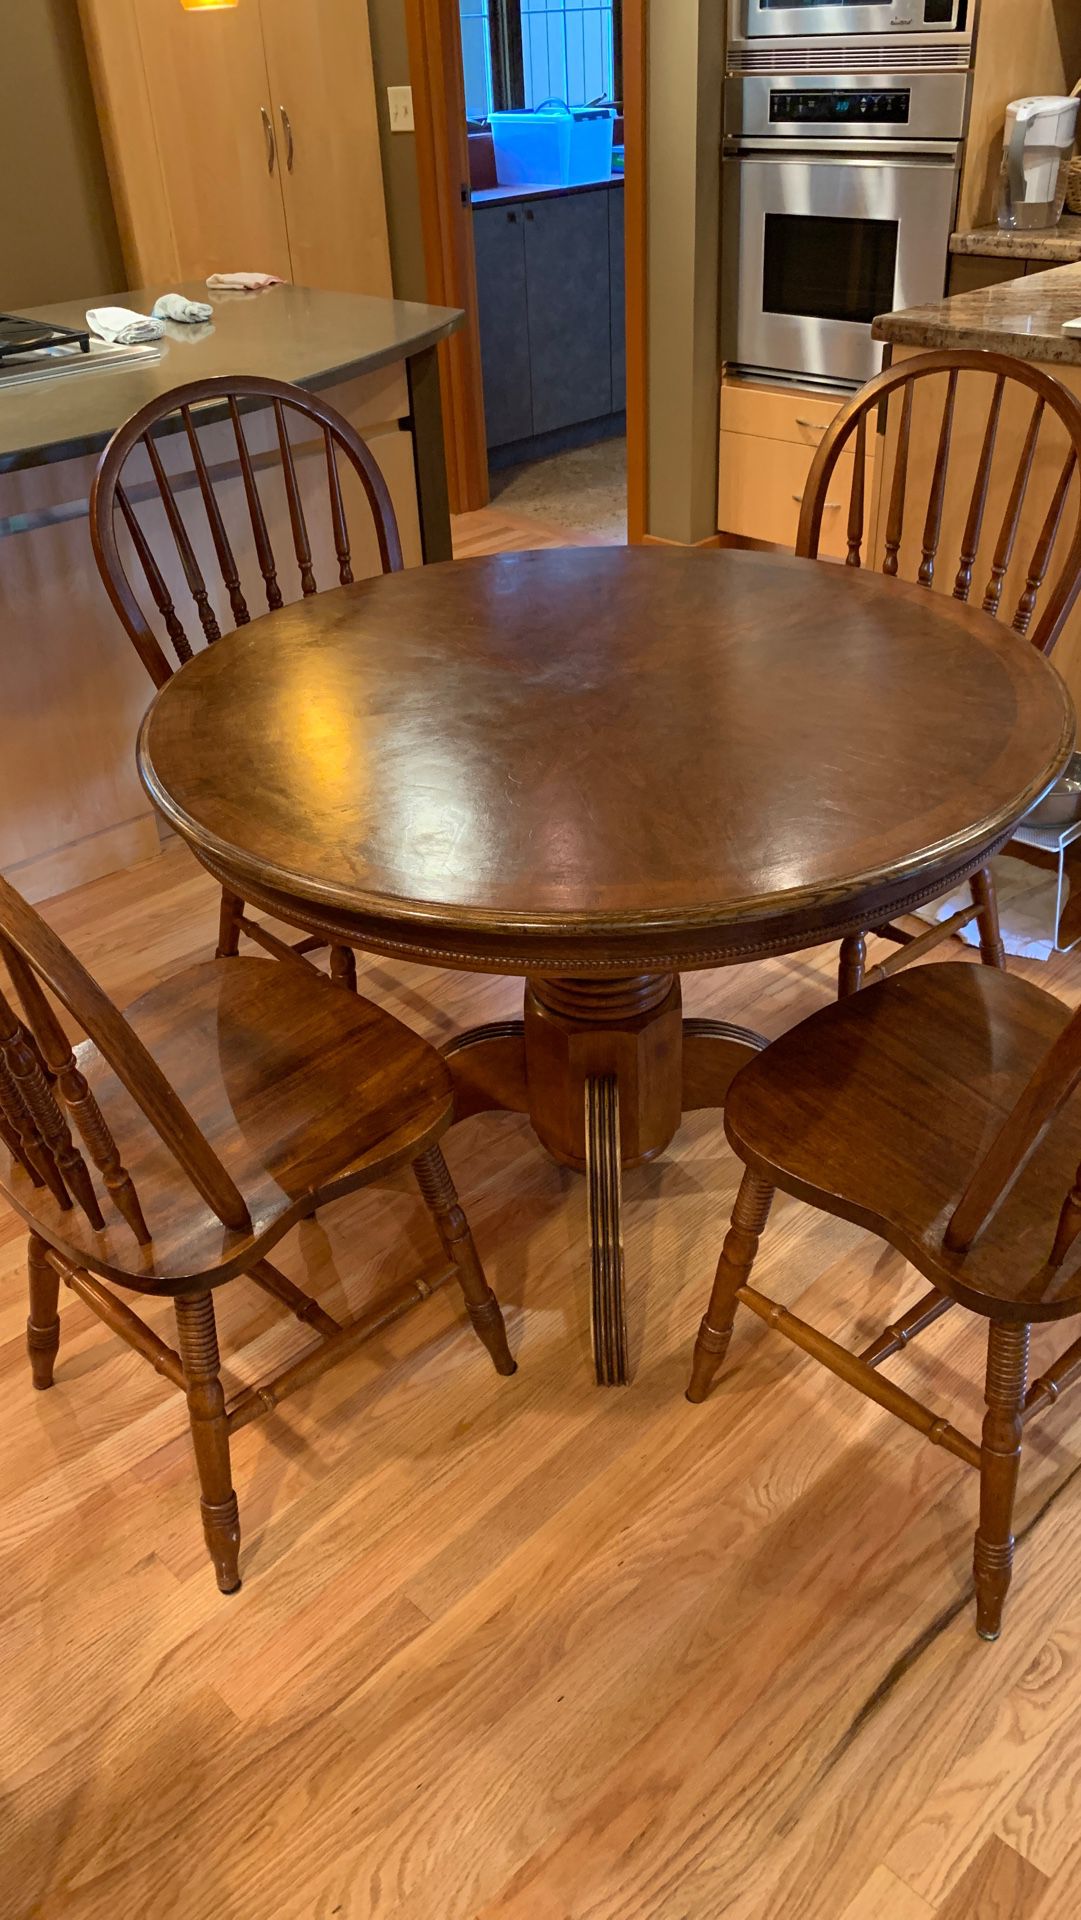 Solid Wooden round kitchen table, 42” diameter 29” height with 4 chairs